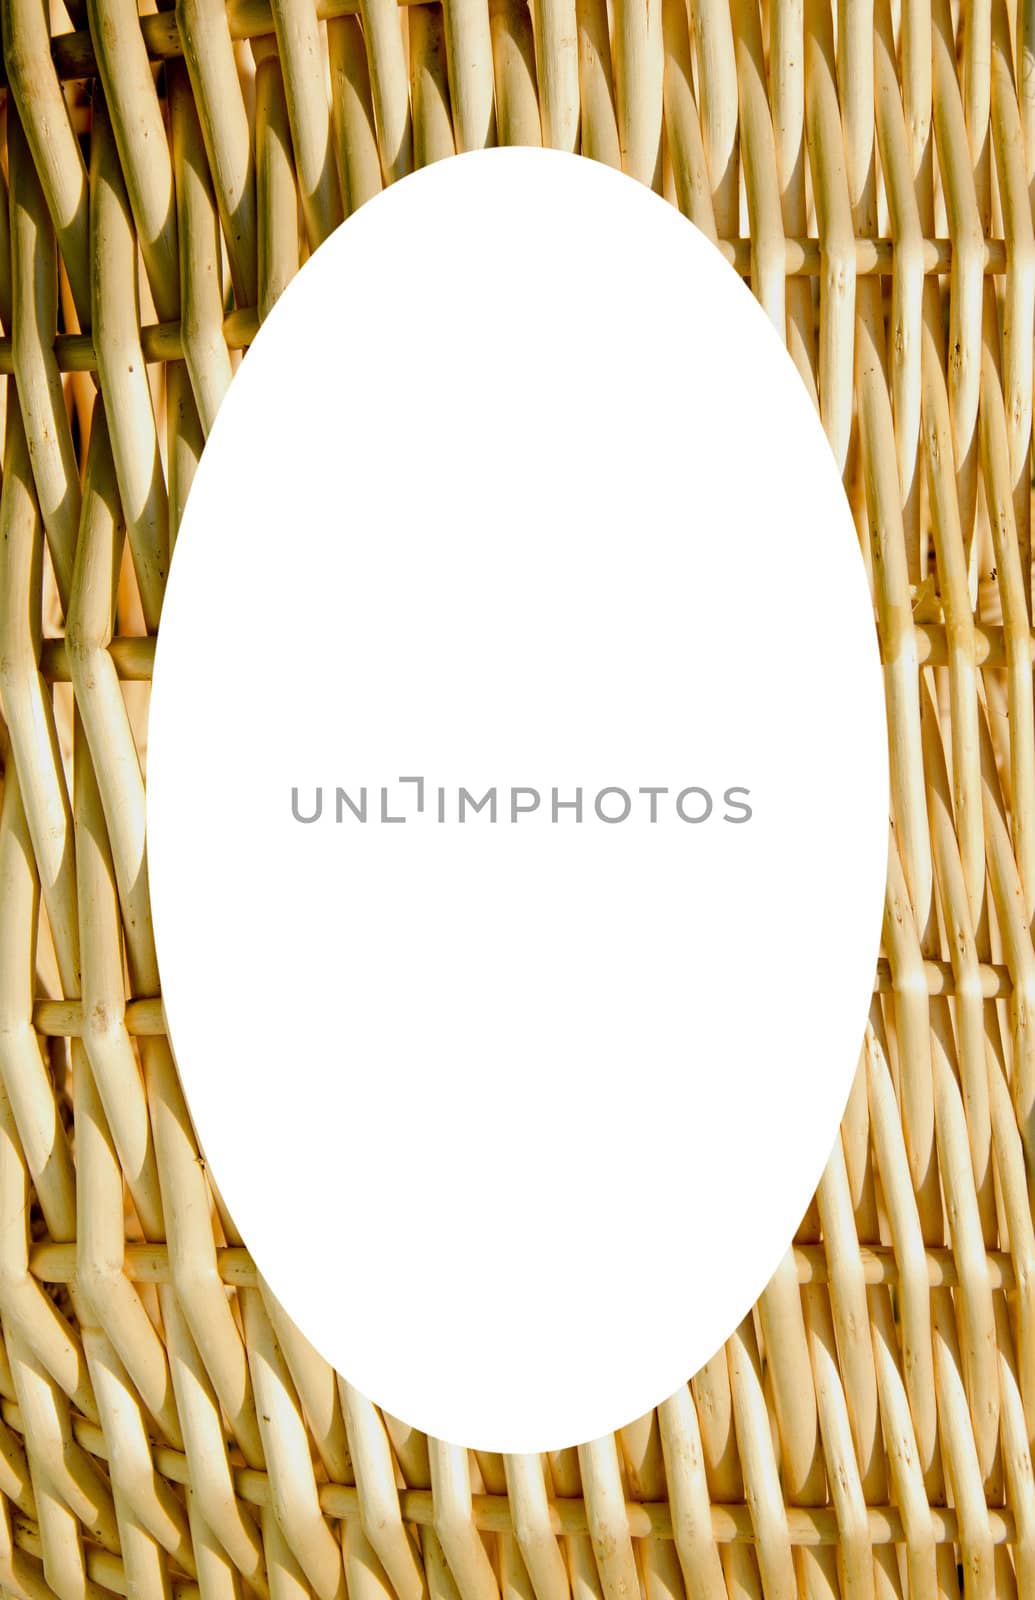 Wicker basket background and white oval in center by sauletas